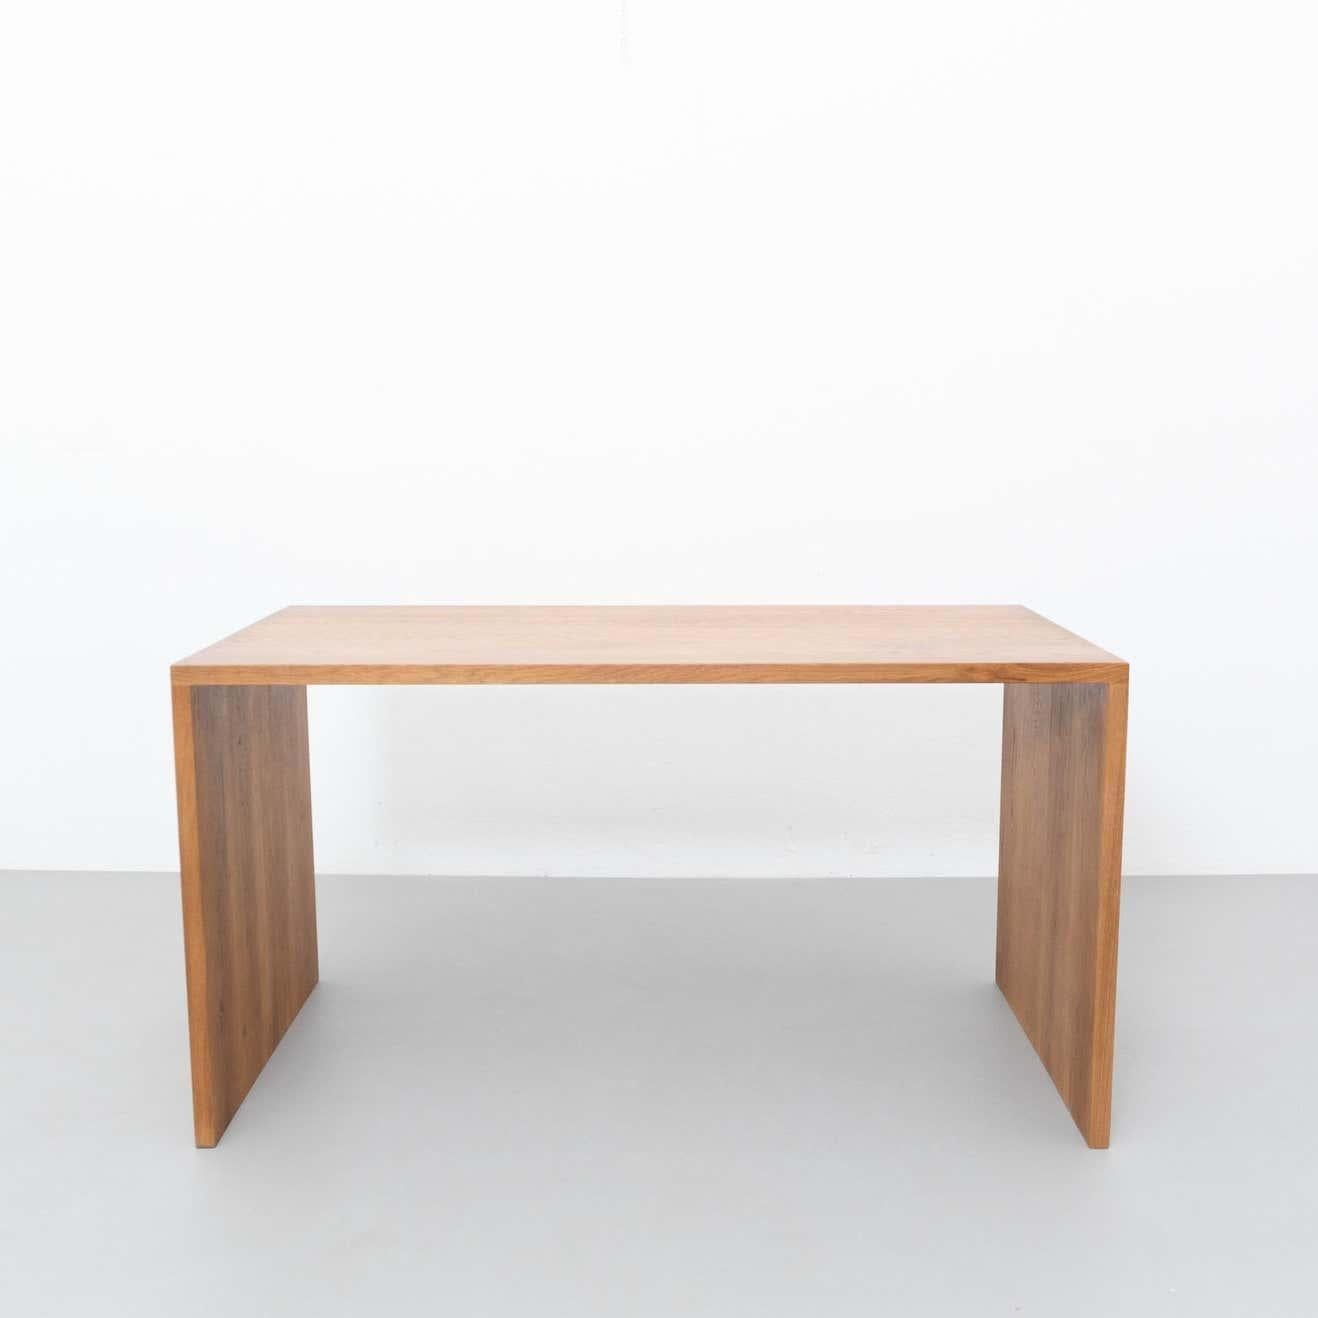 Table by Dada est. manufactured in Barcelona, 2021.

Material: Oak
Dimensions: 72.5 cm D x 140 cm W x 72.5 cm H 

There is the possibility of making it in different measures and woods.

Dada Est. Makes a handmade furniture production with the